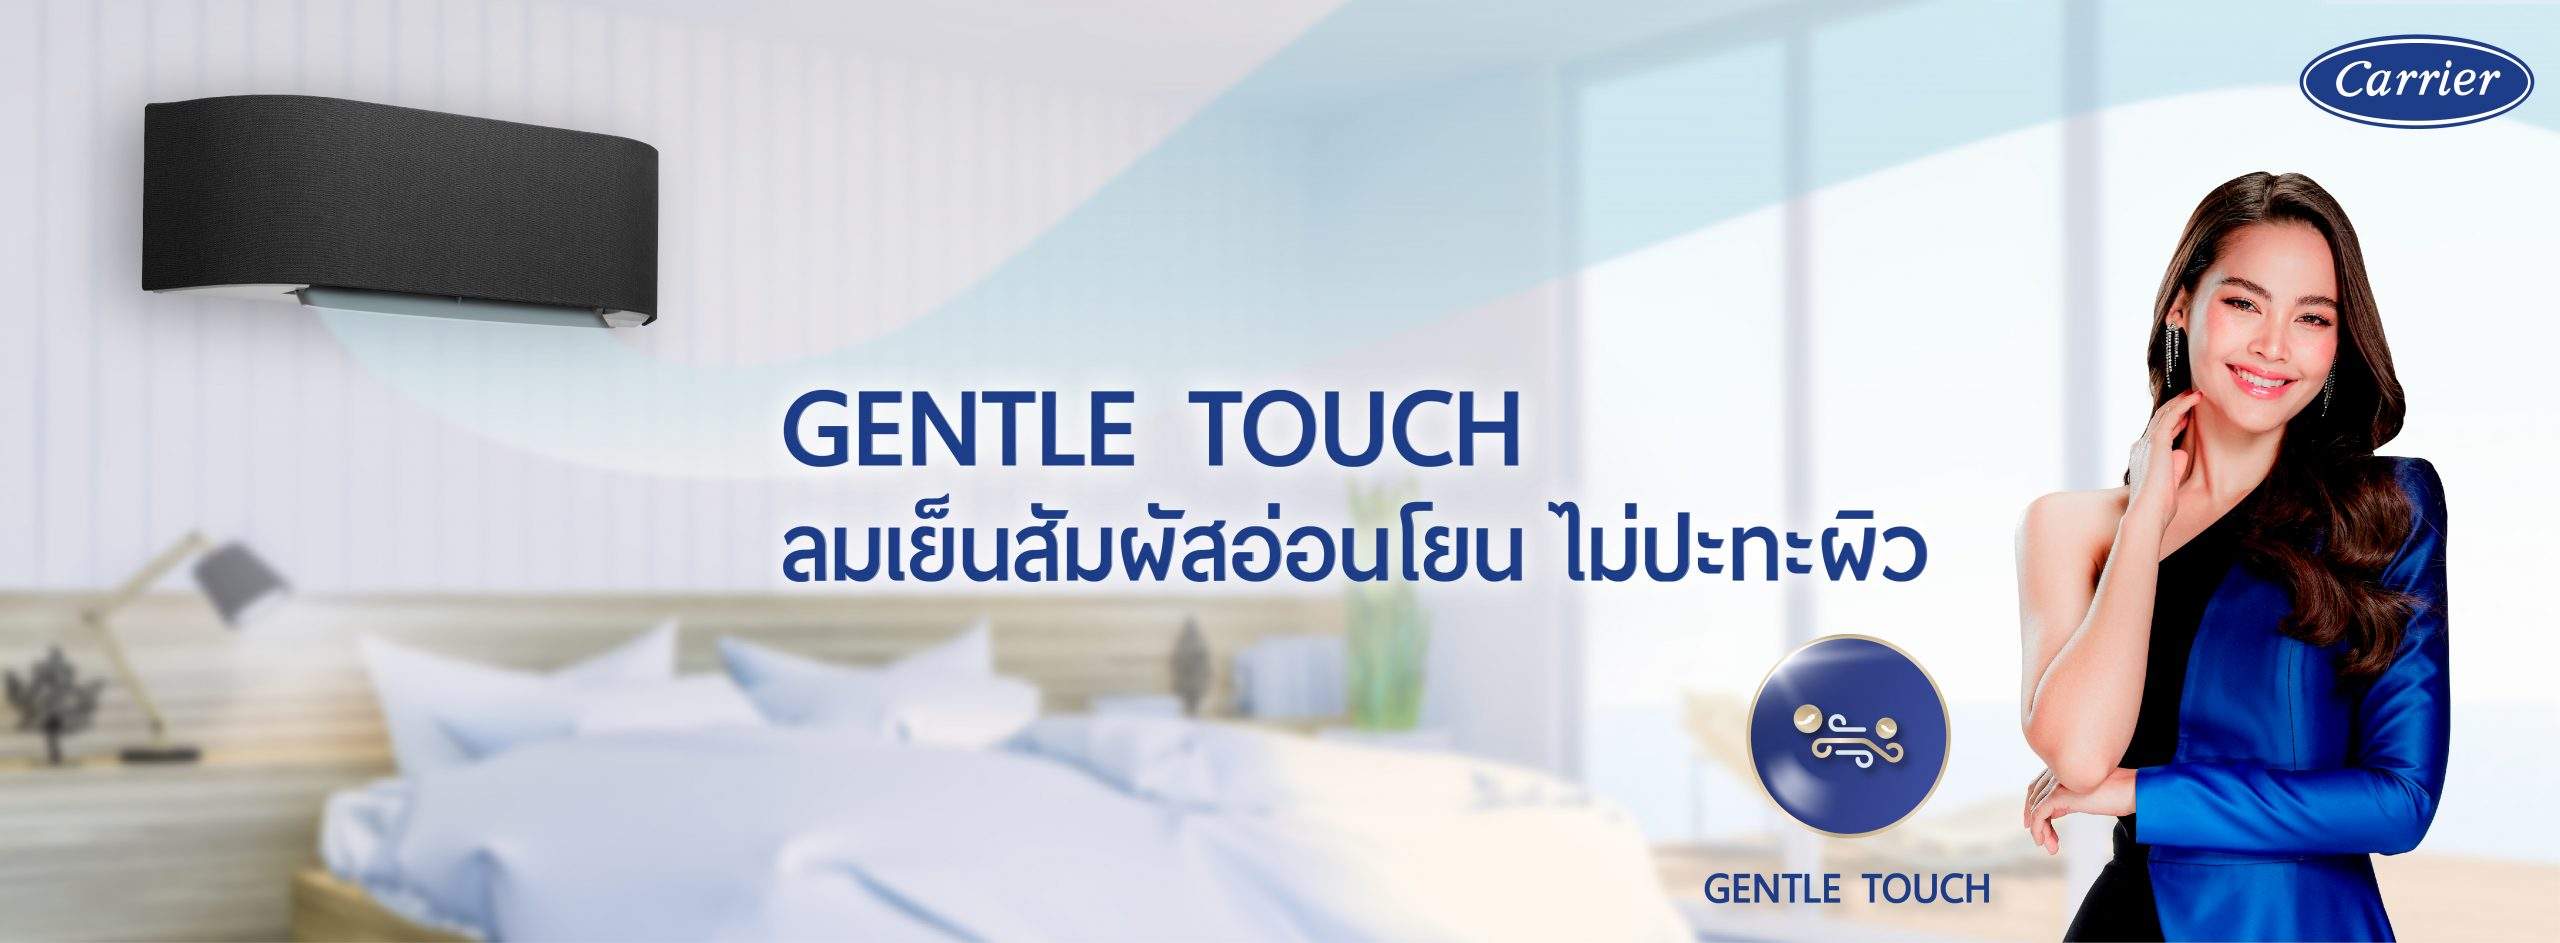 Gentle touch